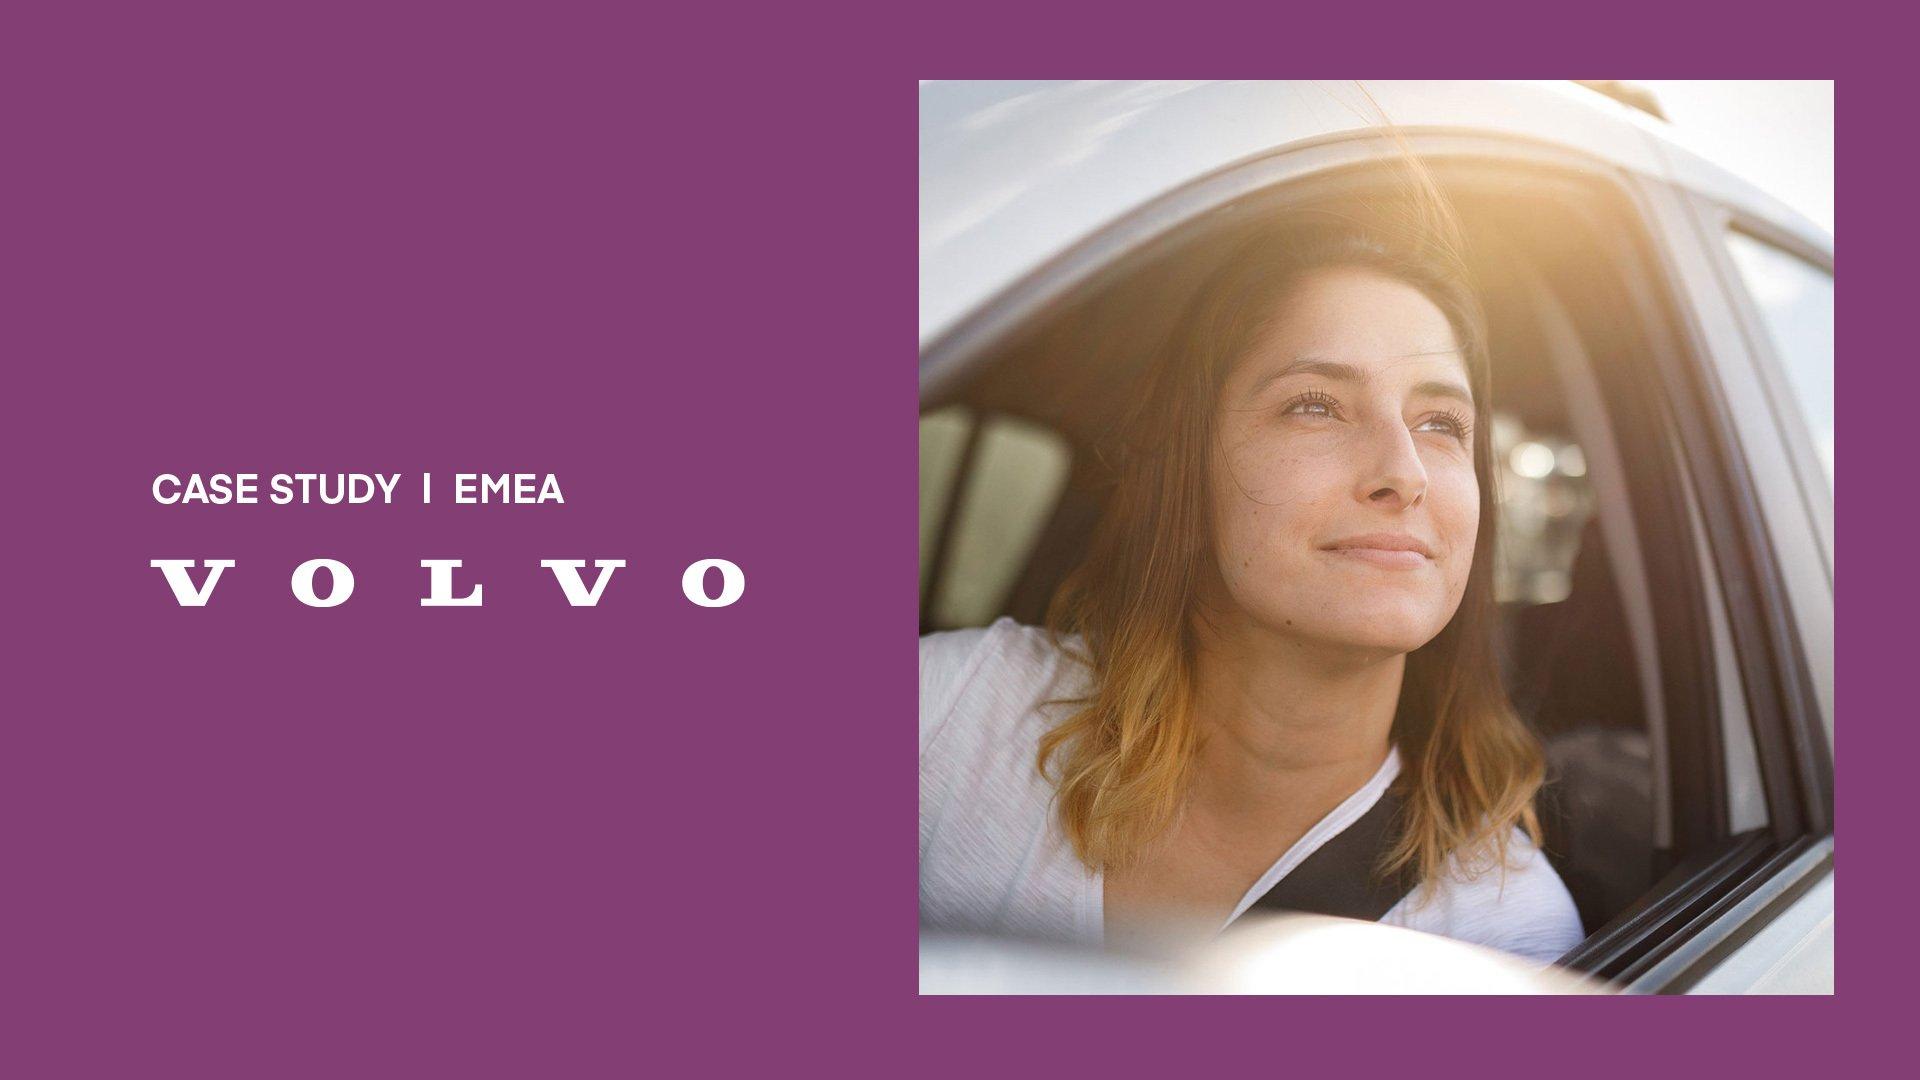 Case Study | EMEA - Volvo, on a purple background with an image of a woman in a car